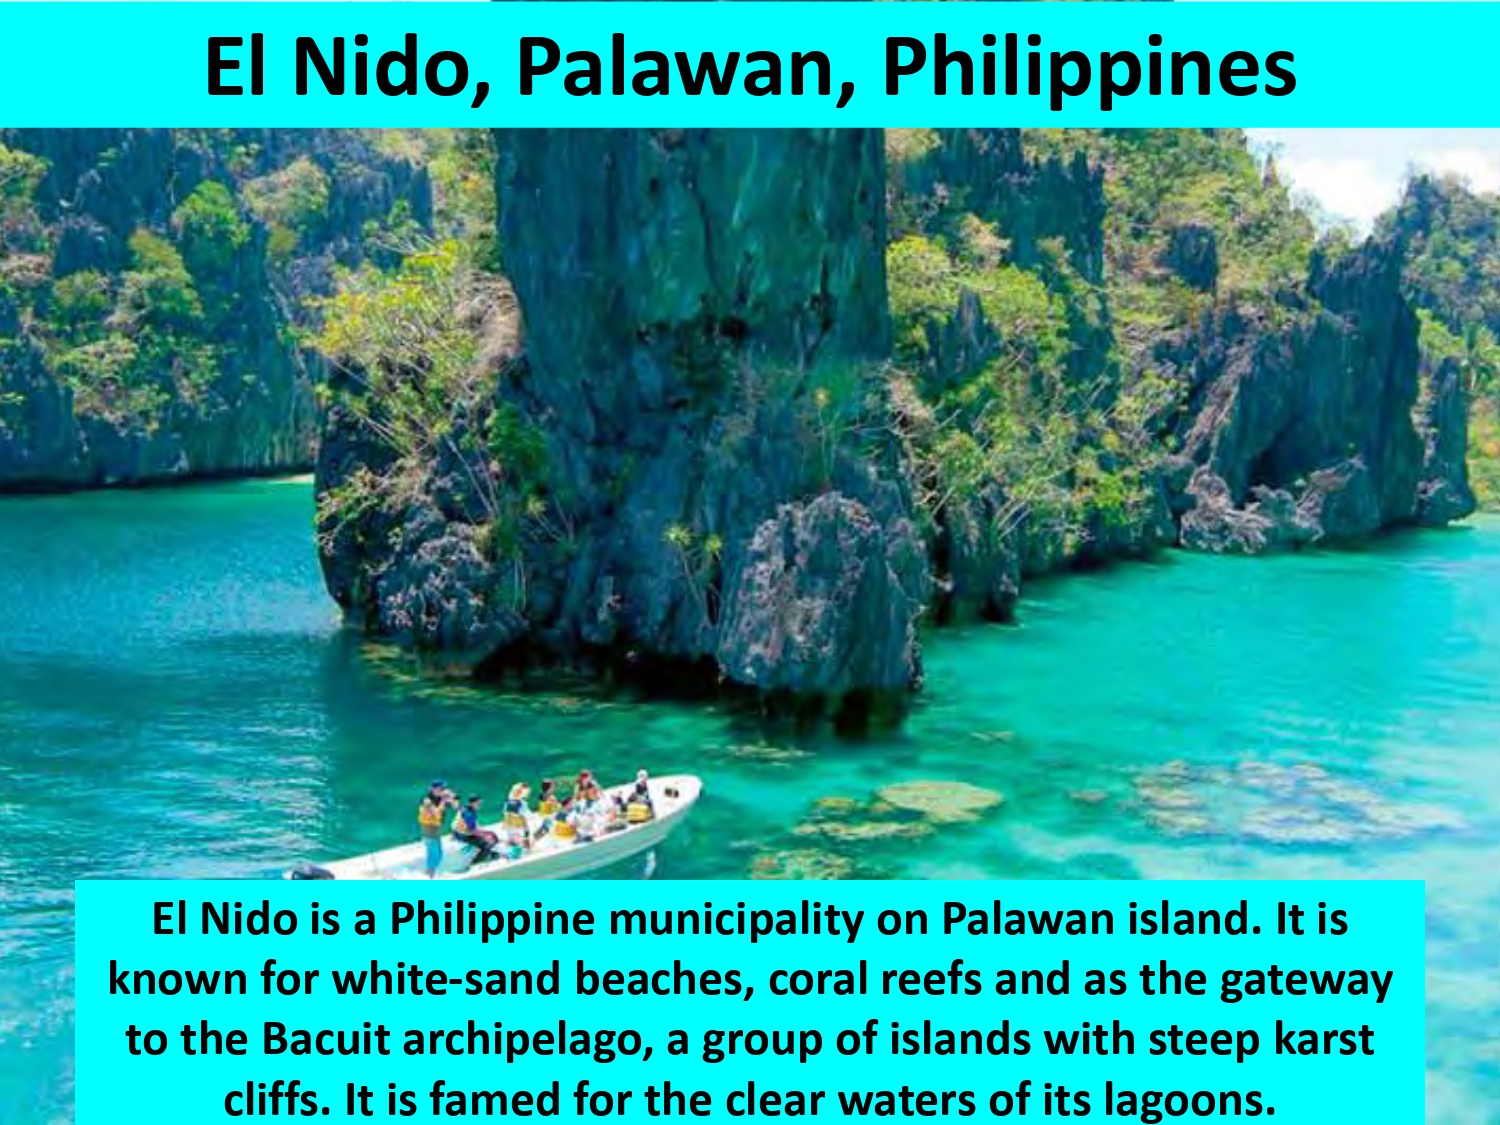 El Nido is a Philippine municipality on Palawan island. It is known for white-sand beaches, coral reefs and as the gateway to the Bacuit archipelago, a group of islands with steep karst cliffs. It is famed for the clear waters of its lagoons.